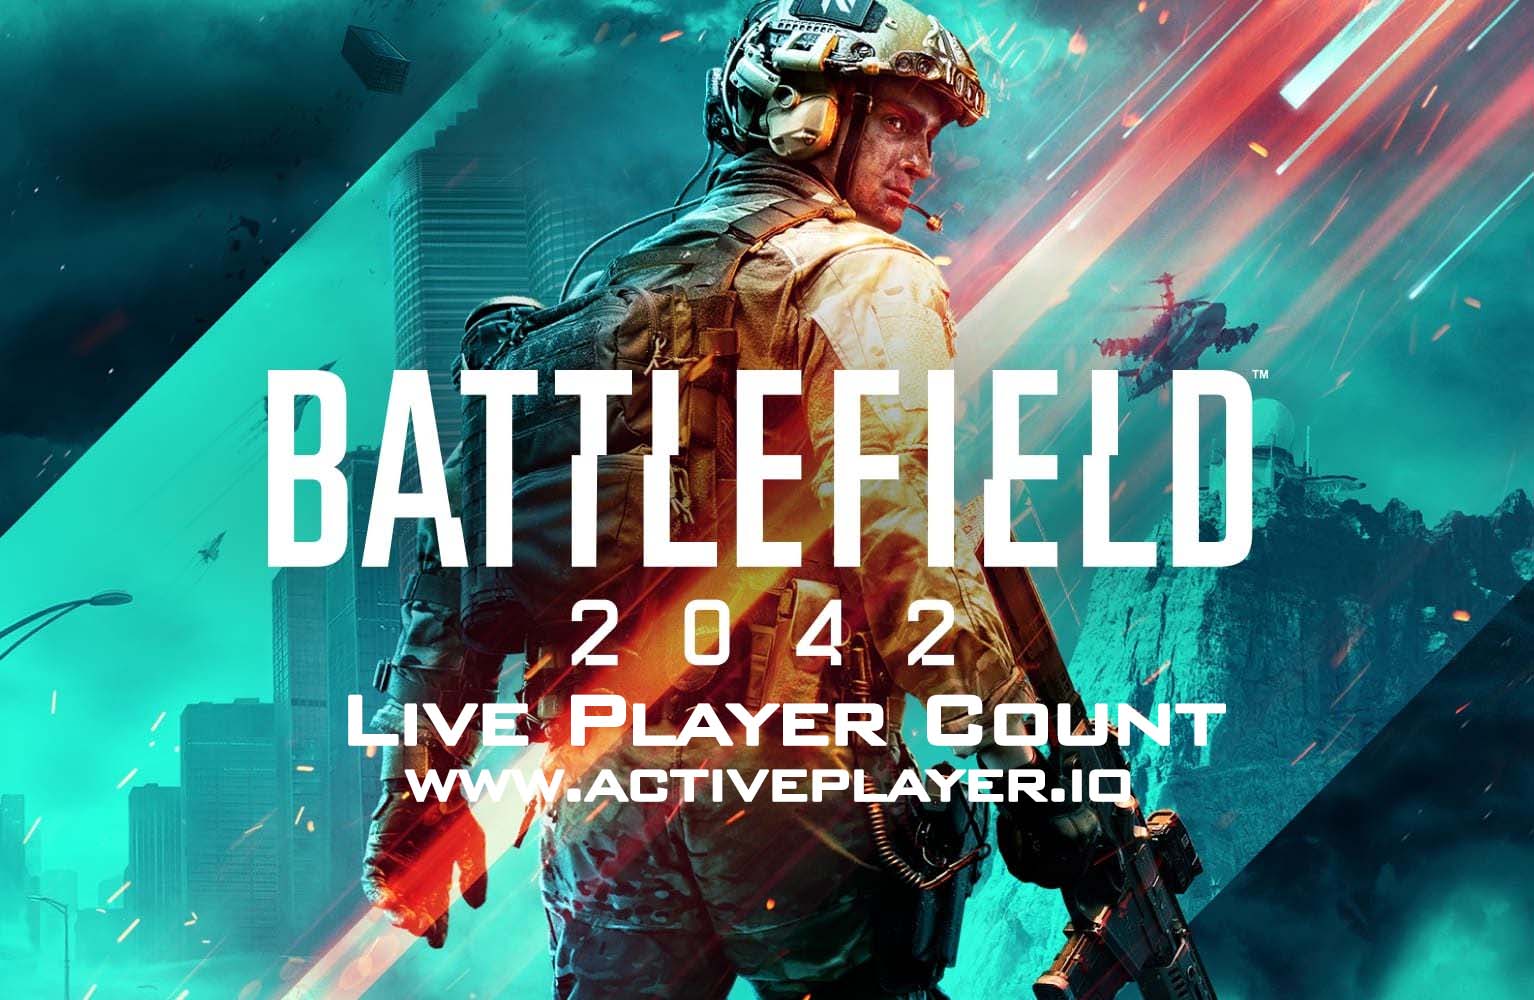 Battlefield 5 player count 2022: how many people play Battlefield 5?